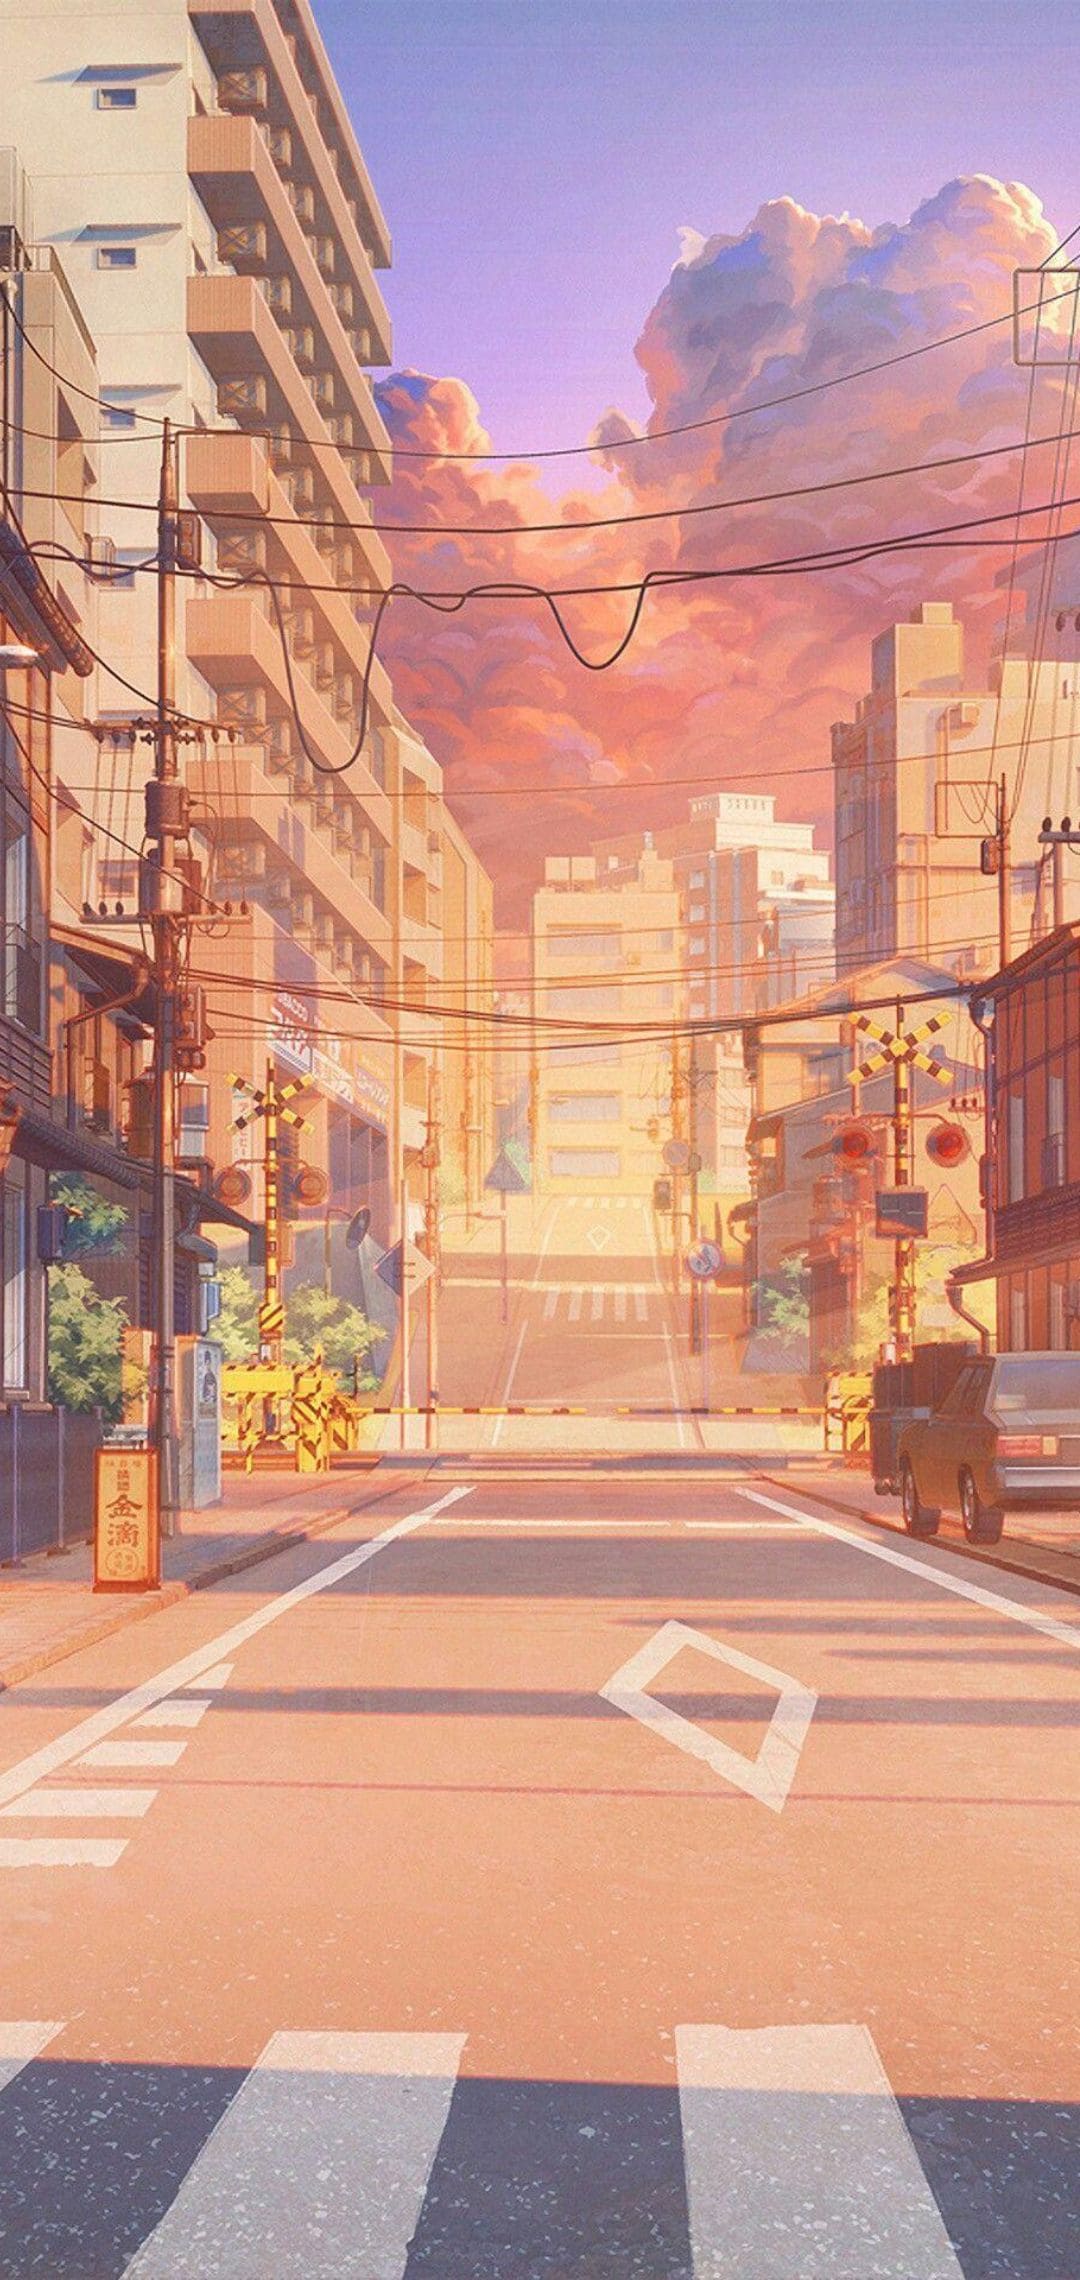 Anime Scenery iPhone Wallpaper Best 21 Anime Scenery iPhone Background